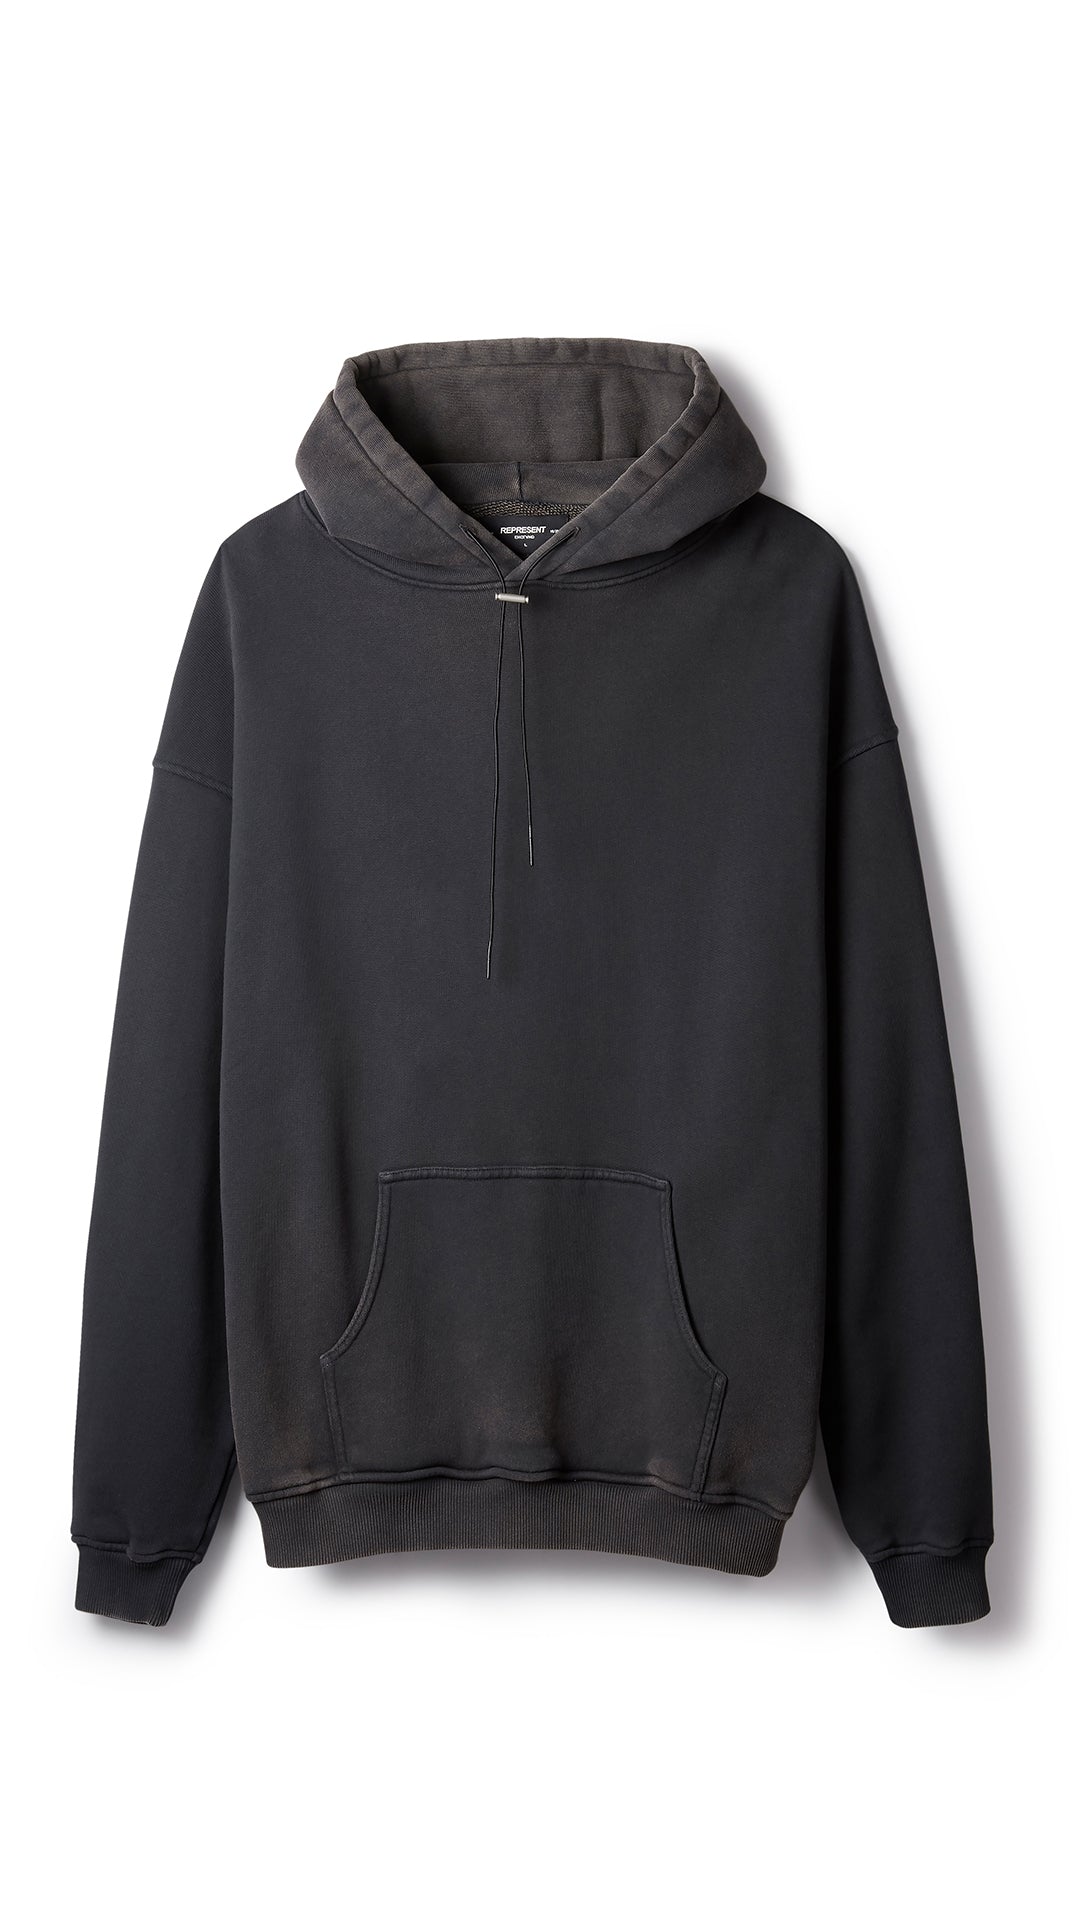 washed out black hoodie